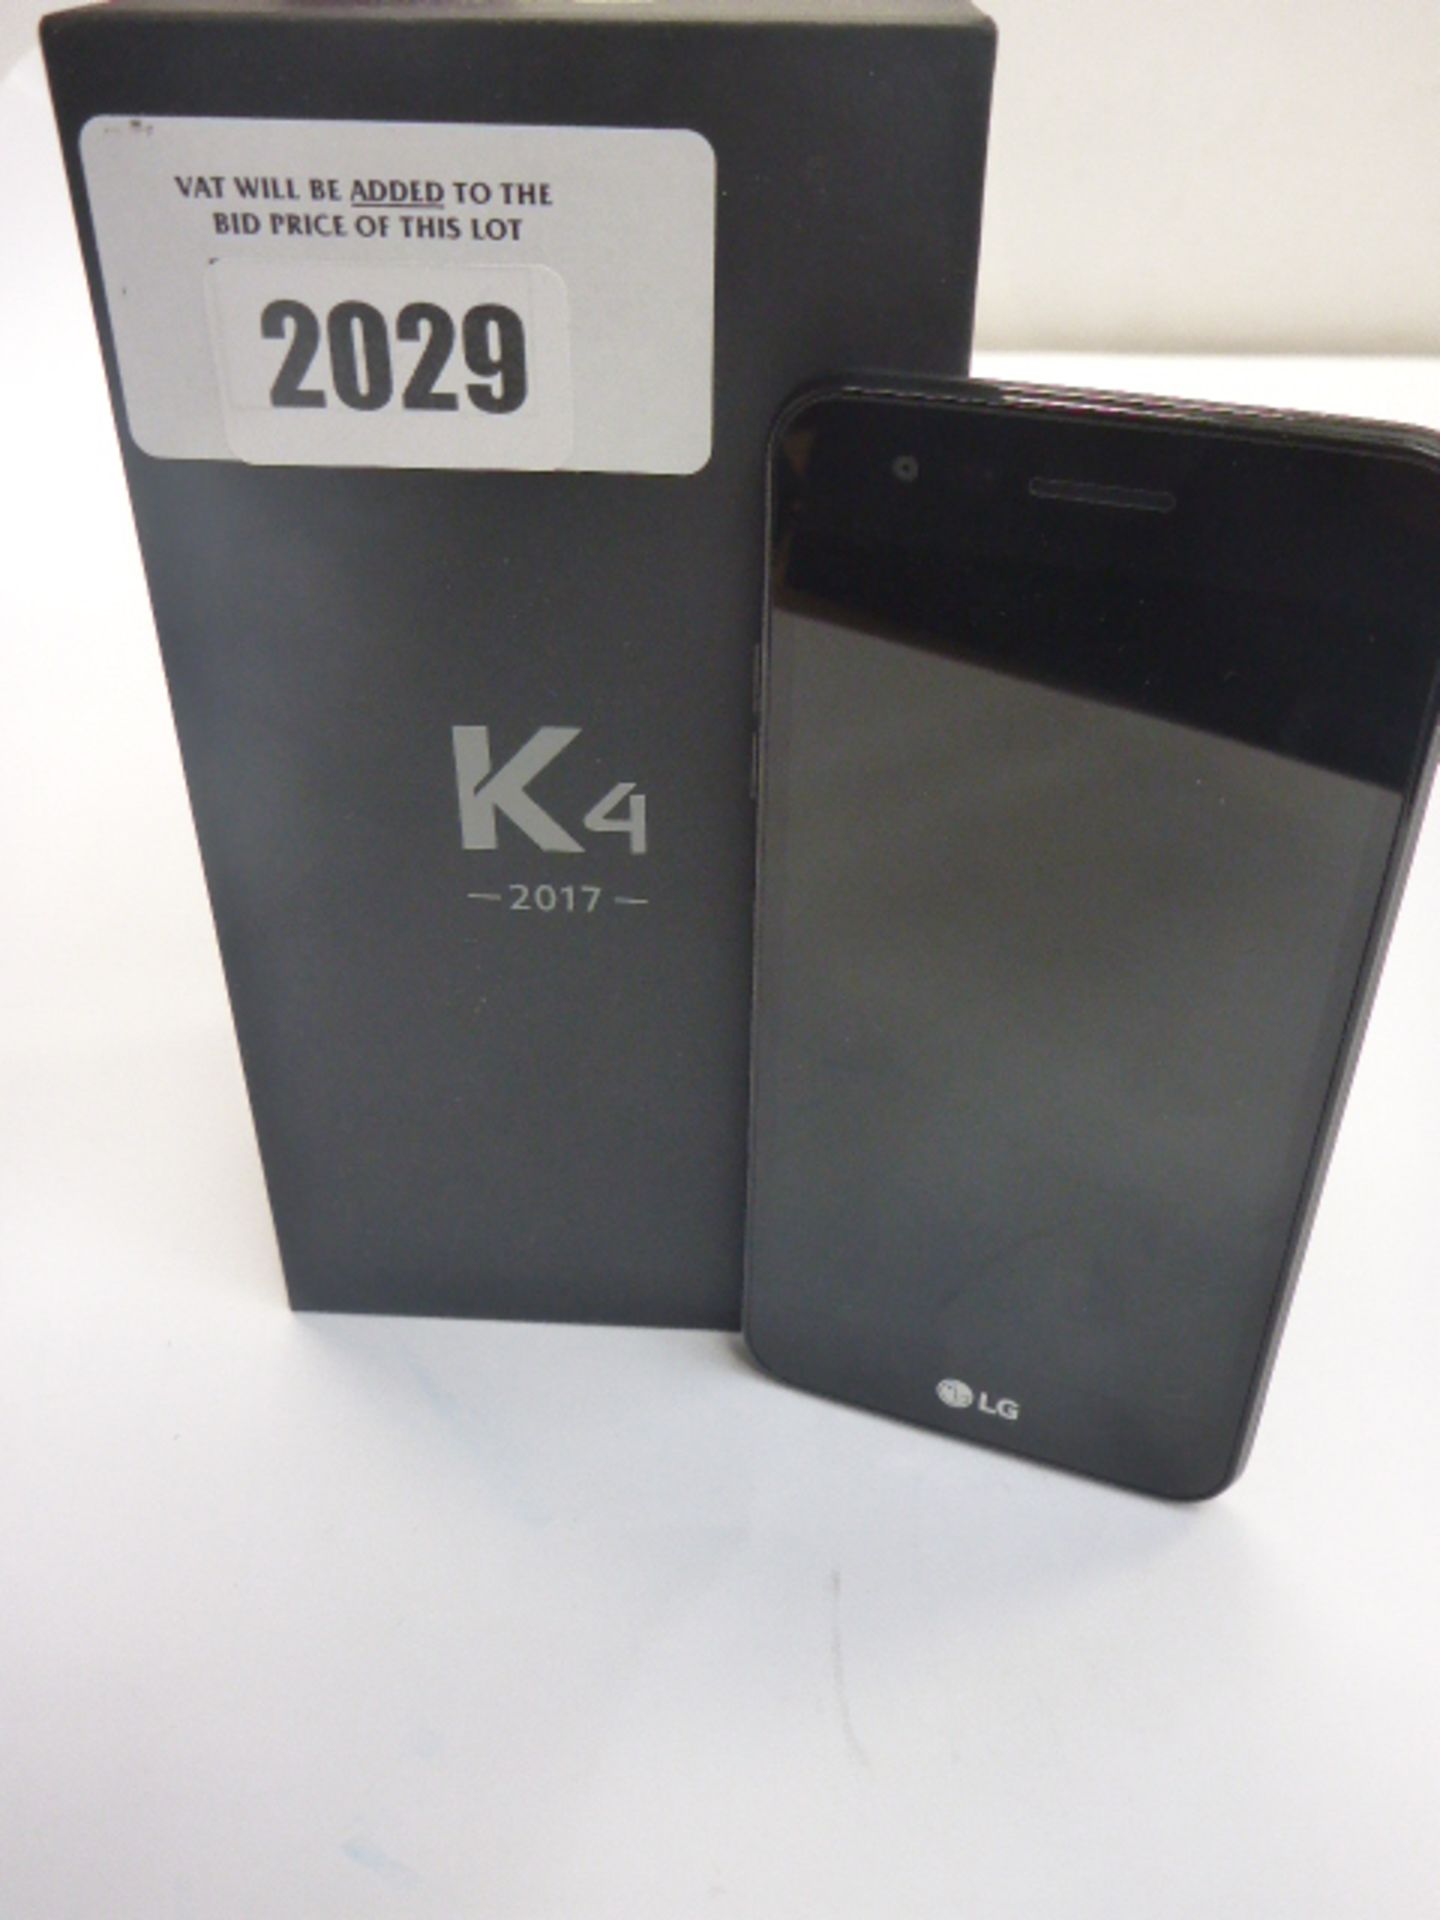 LG K4 2017 Android mobile phone, 8GB storage with box.